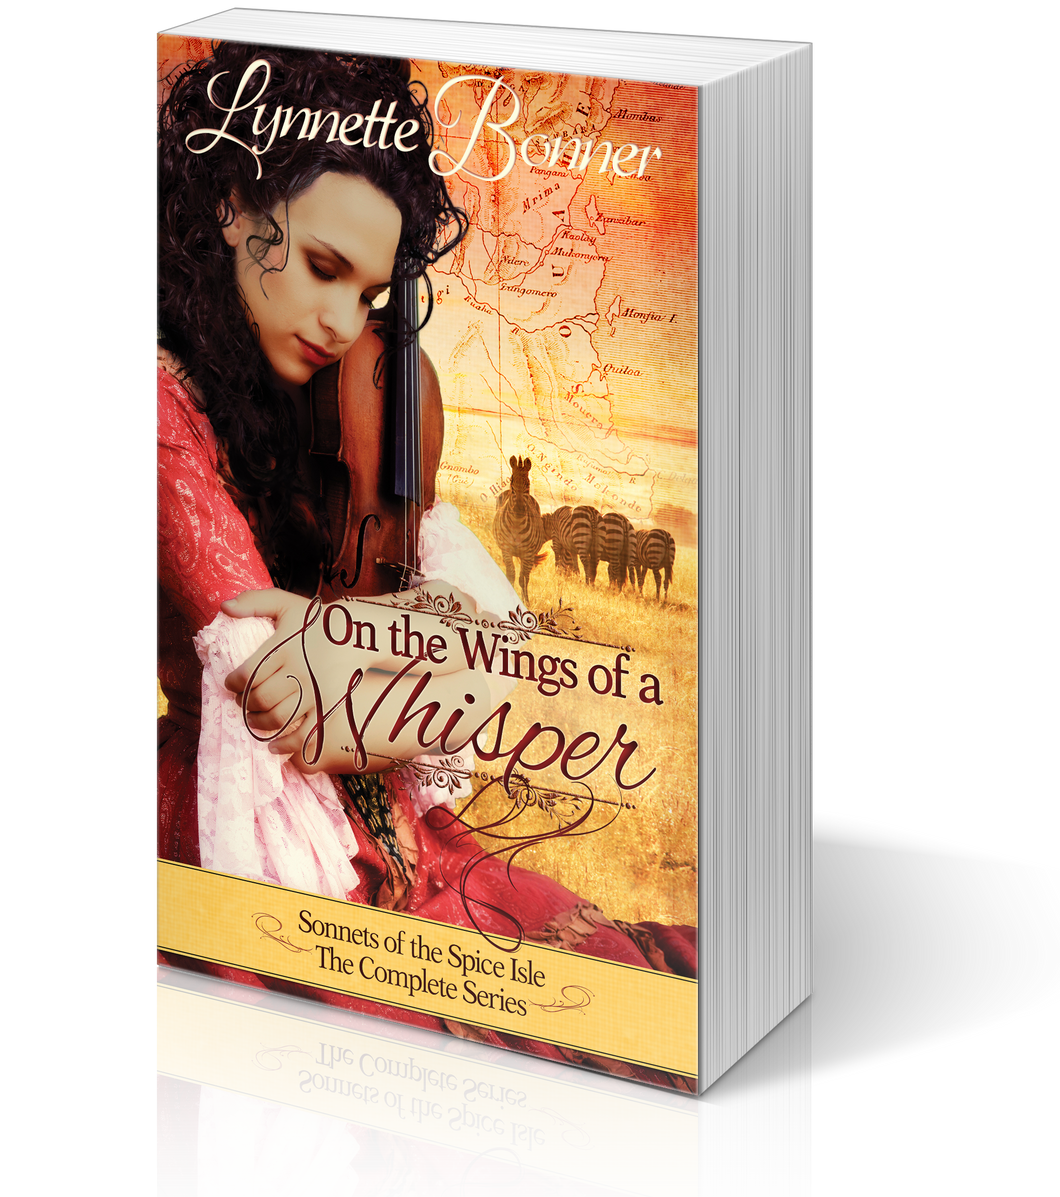 On the Wings of a Whisper (Complete Story) - Signed Paperback